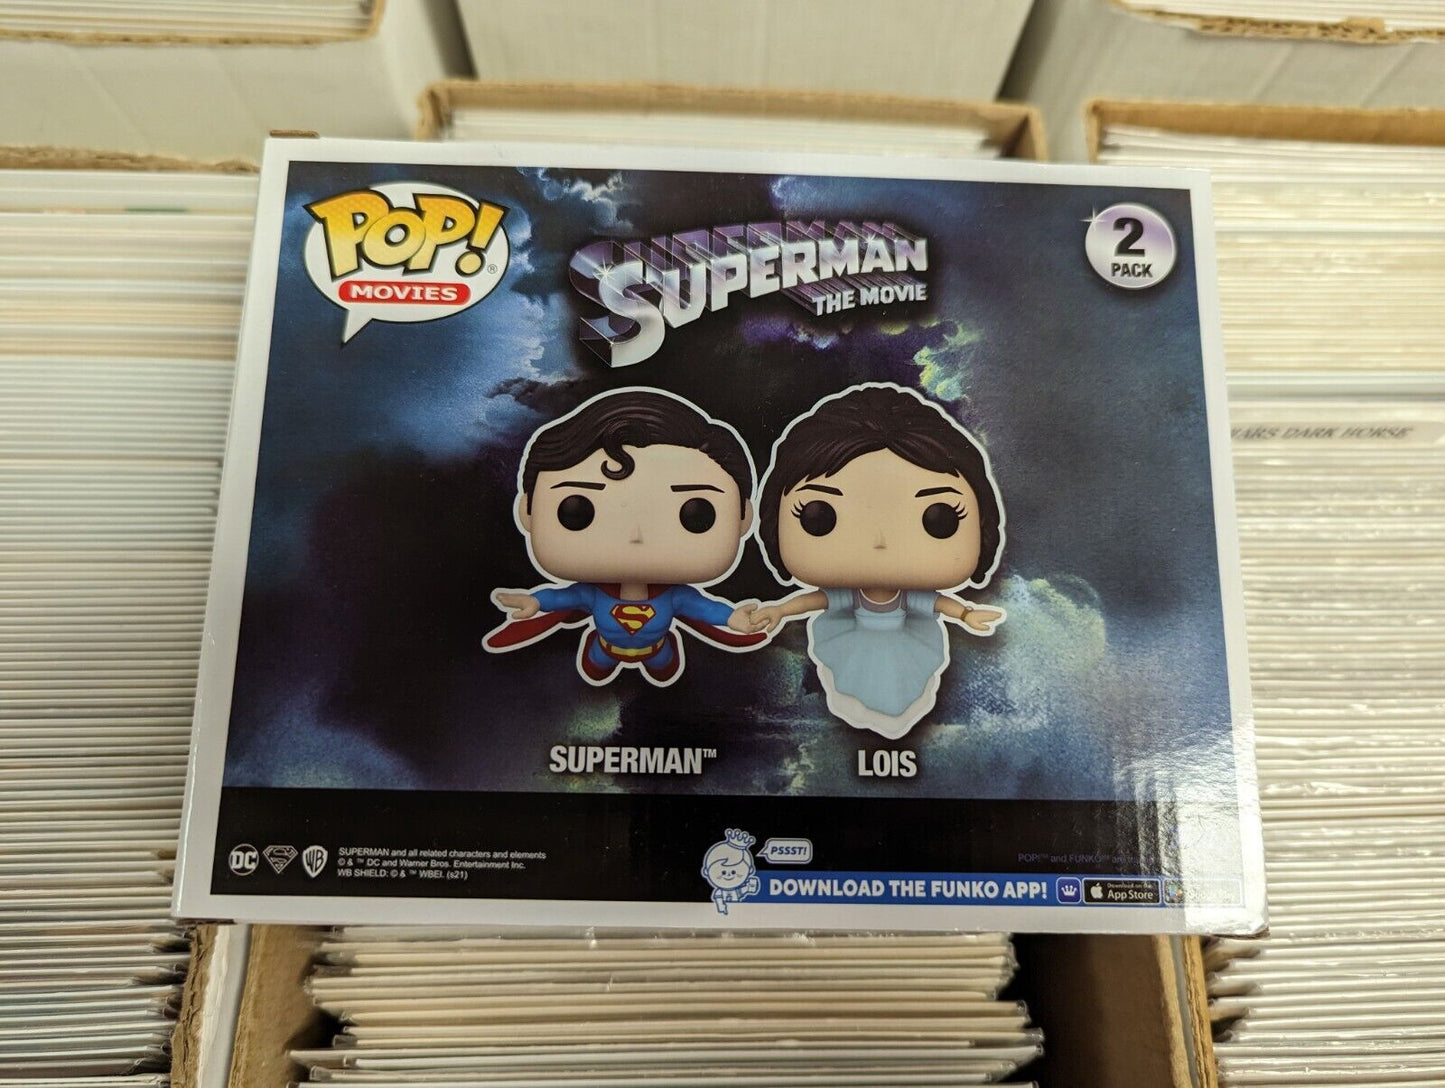 Funko Pop Superman And Lois Flying 2 Pack Zavvi Exclusive